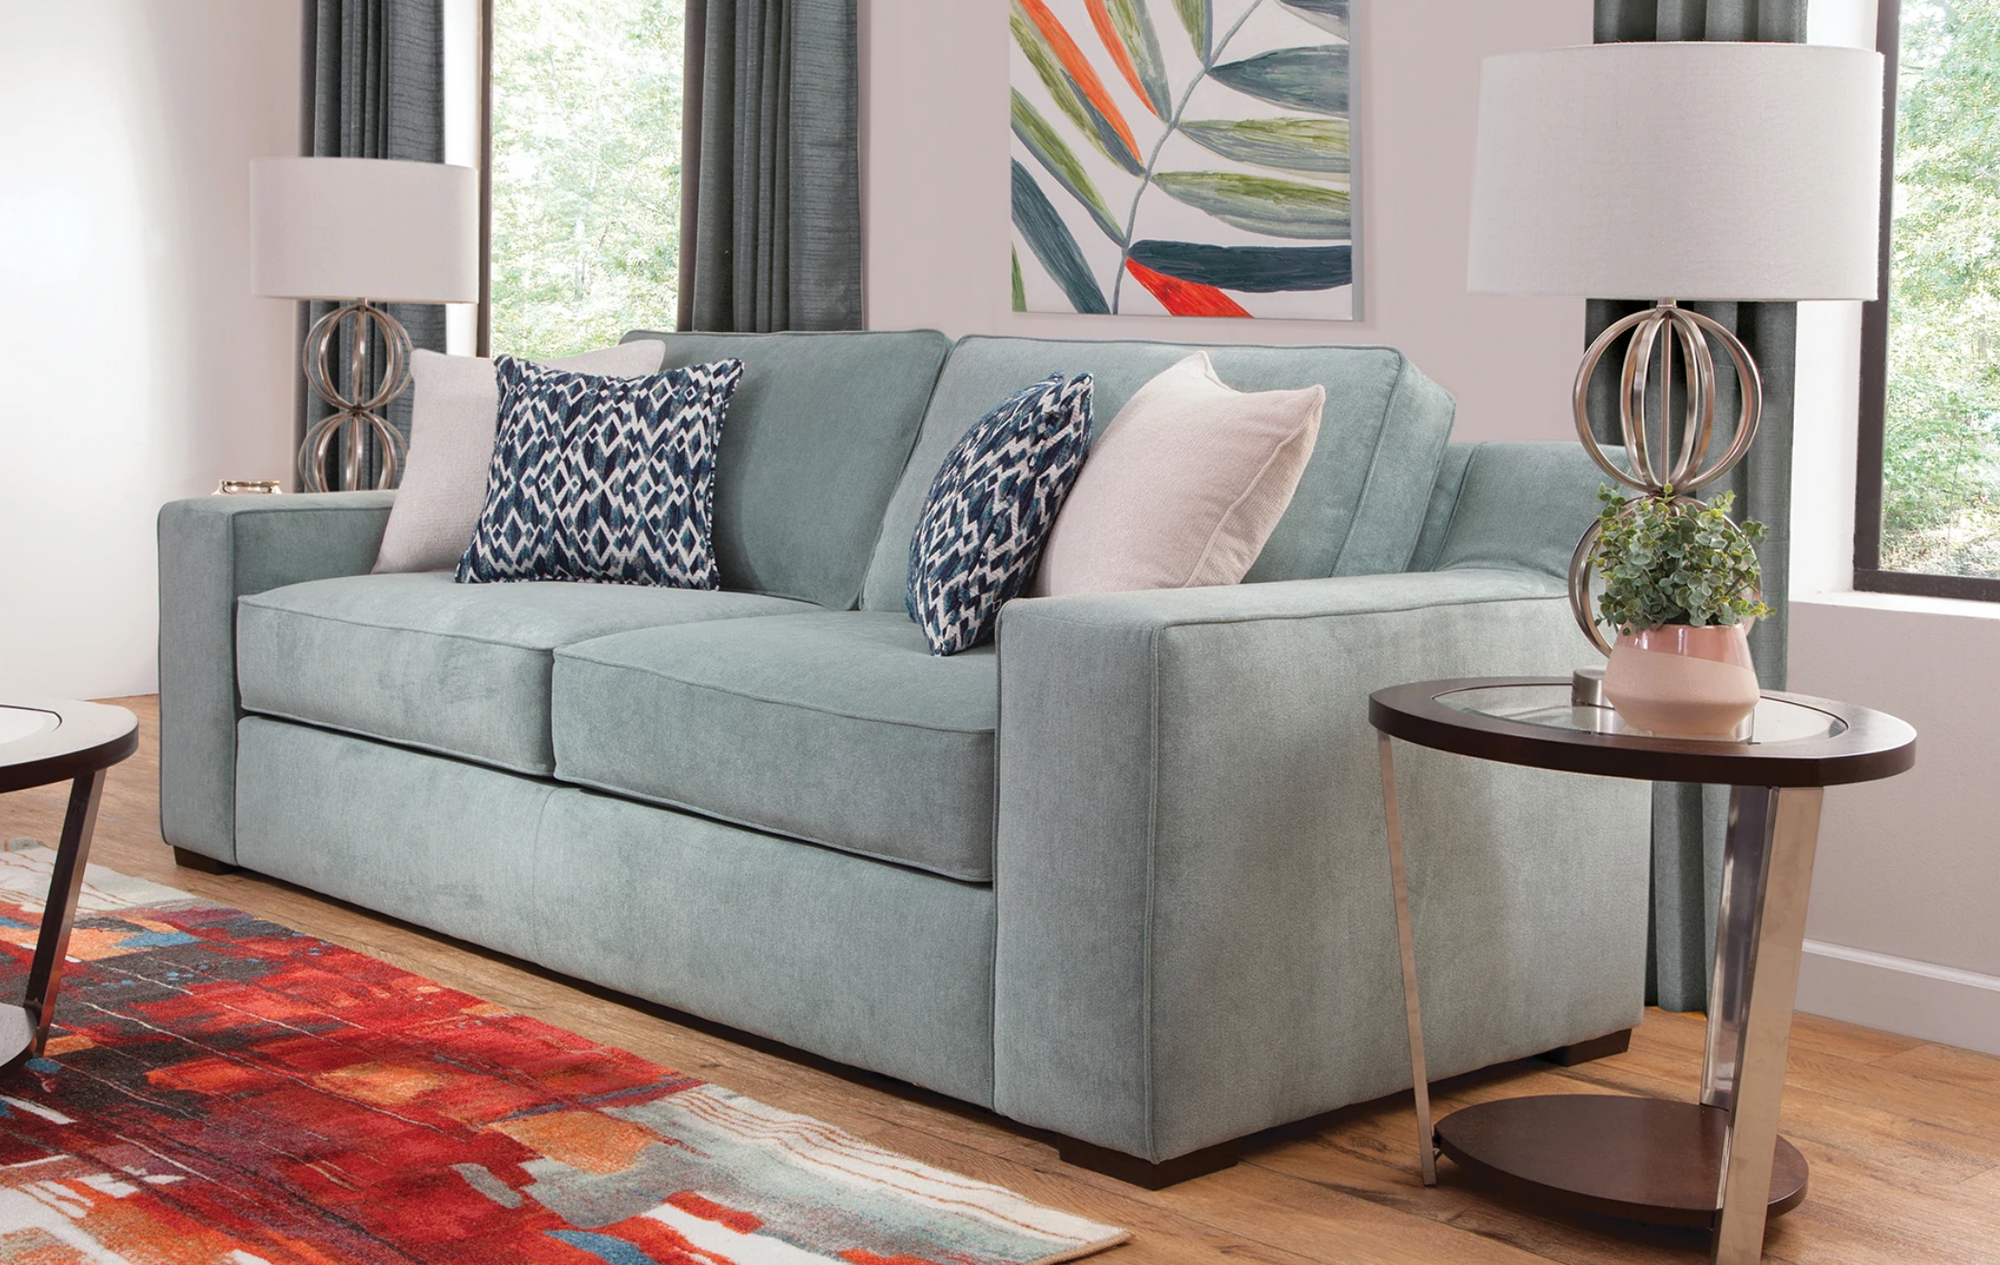 Furniture Upholstery Guide: How to Choose the Best Furniture Fabric